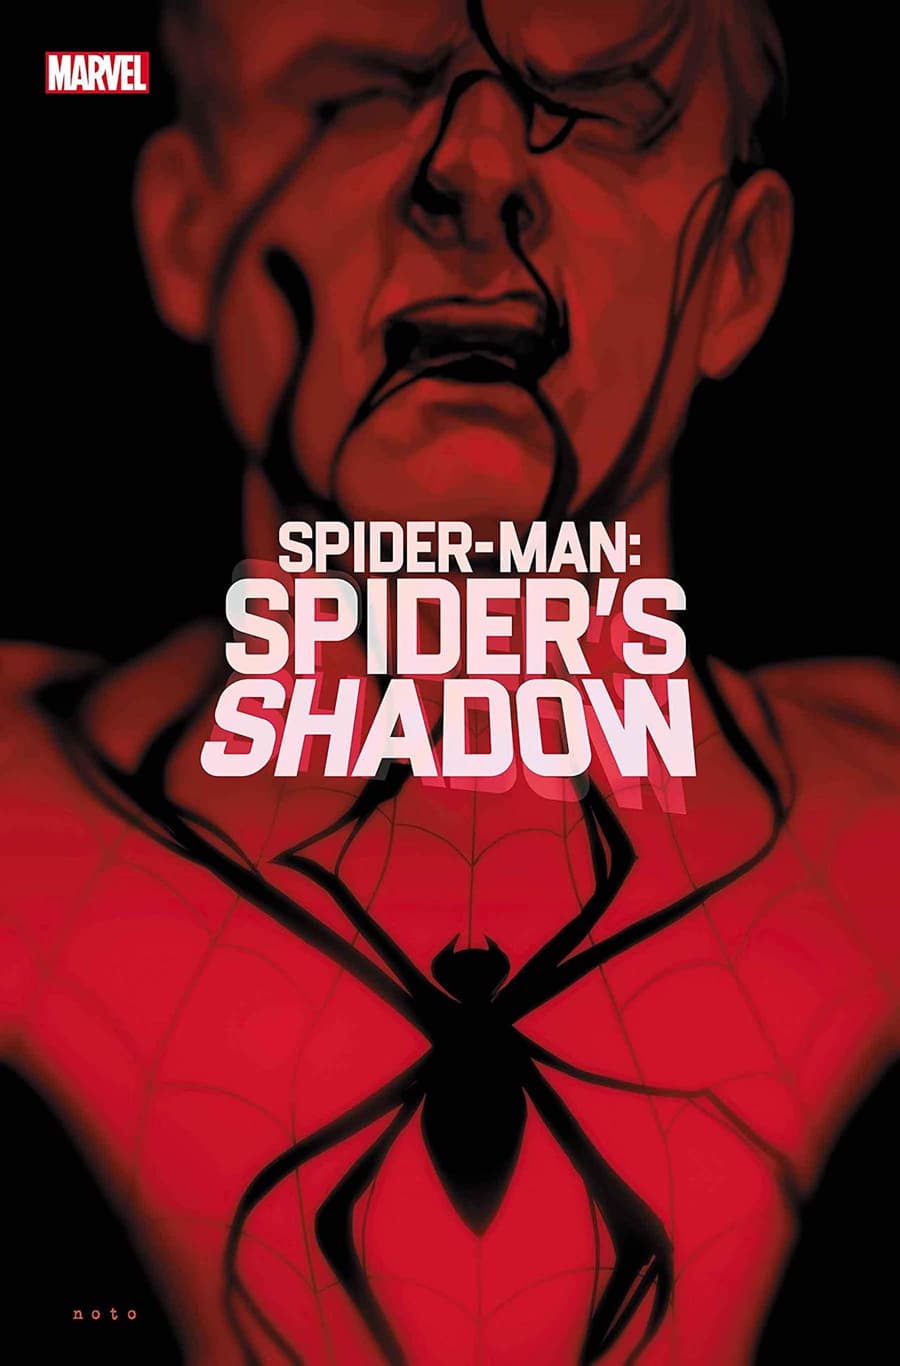 Spider-Man: The Spider's Shadow (2021-) #1 cover by Phil Noto